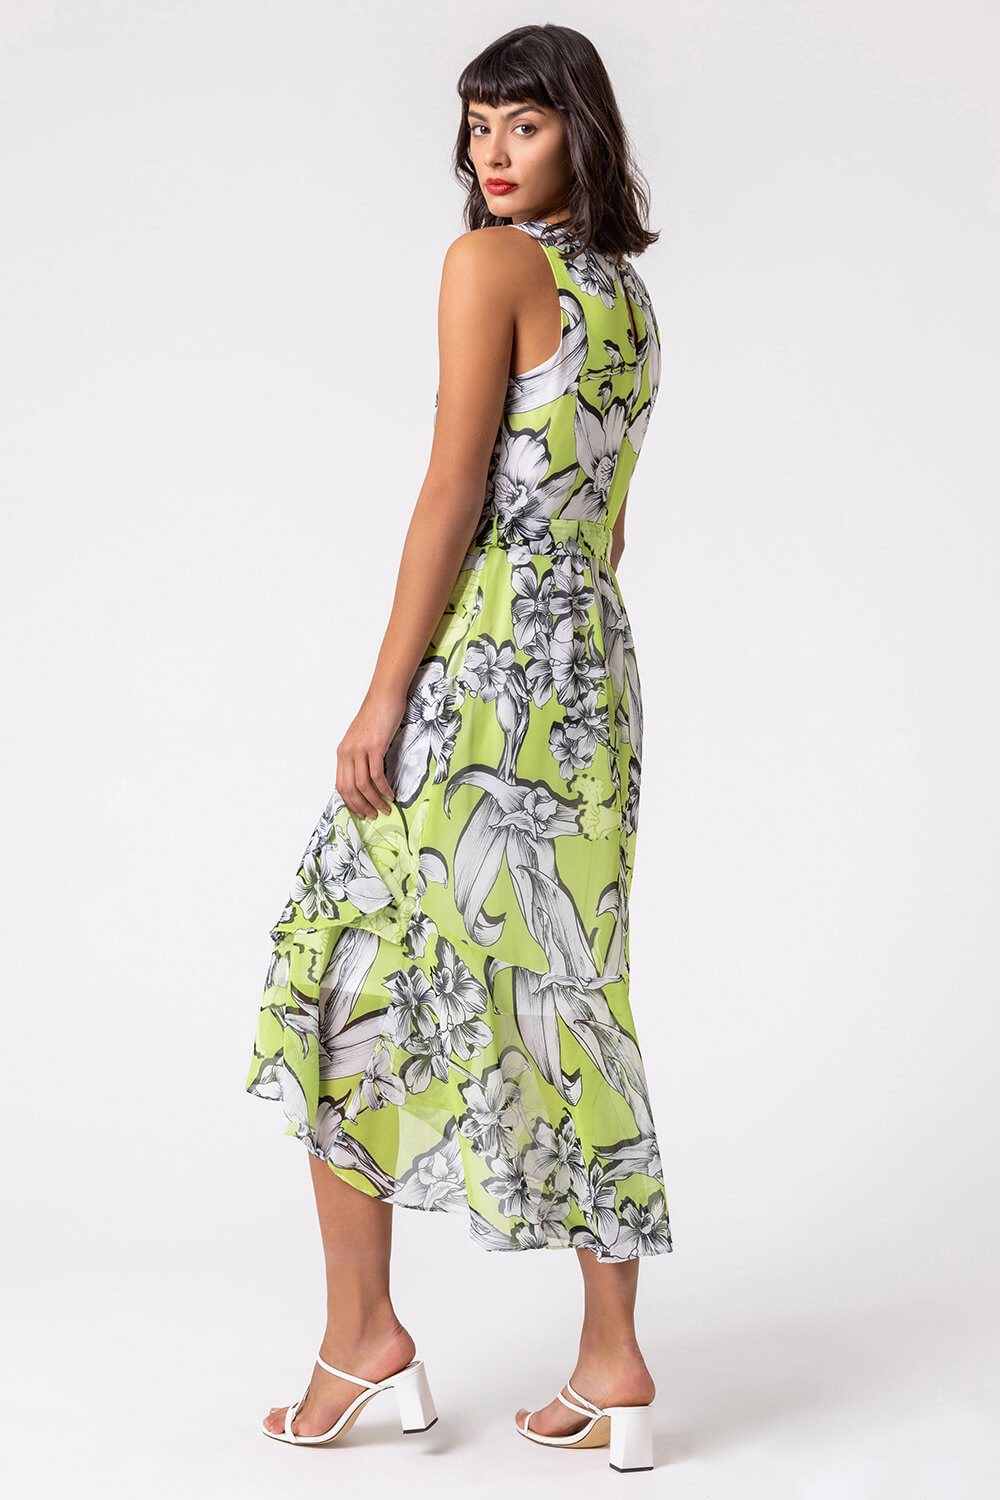 Lime Floral Tie Waist Dipped Hem Dress, Image 2 of 4